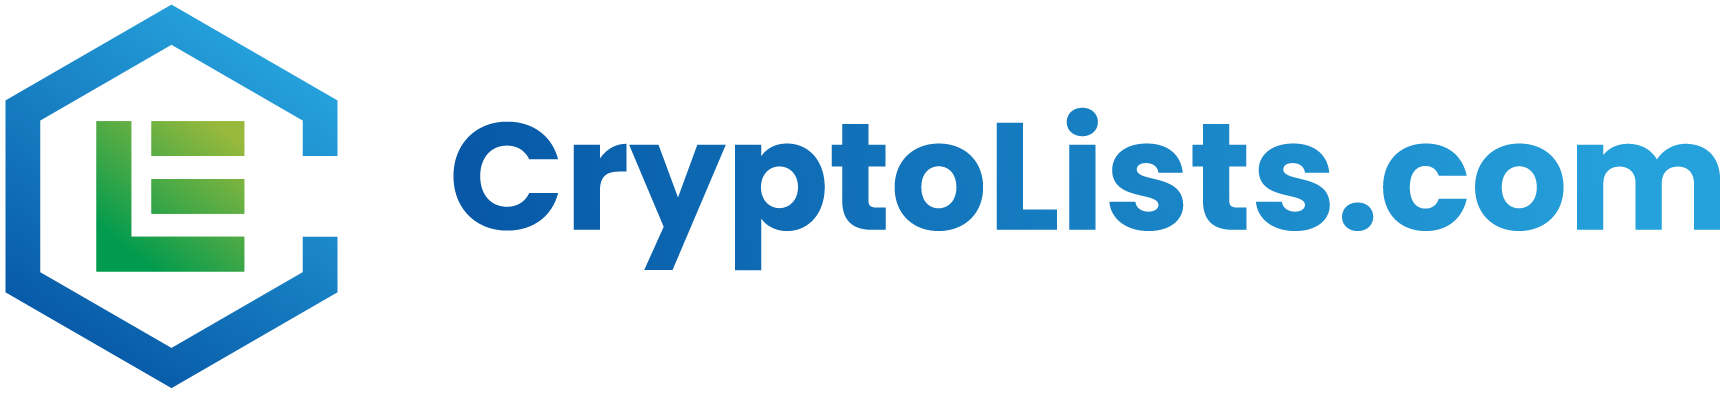 CryptoLists Perfect Logo Package_Pro Model_54 Logo_Brand Name_Two Colors